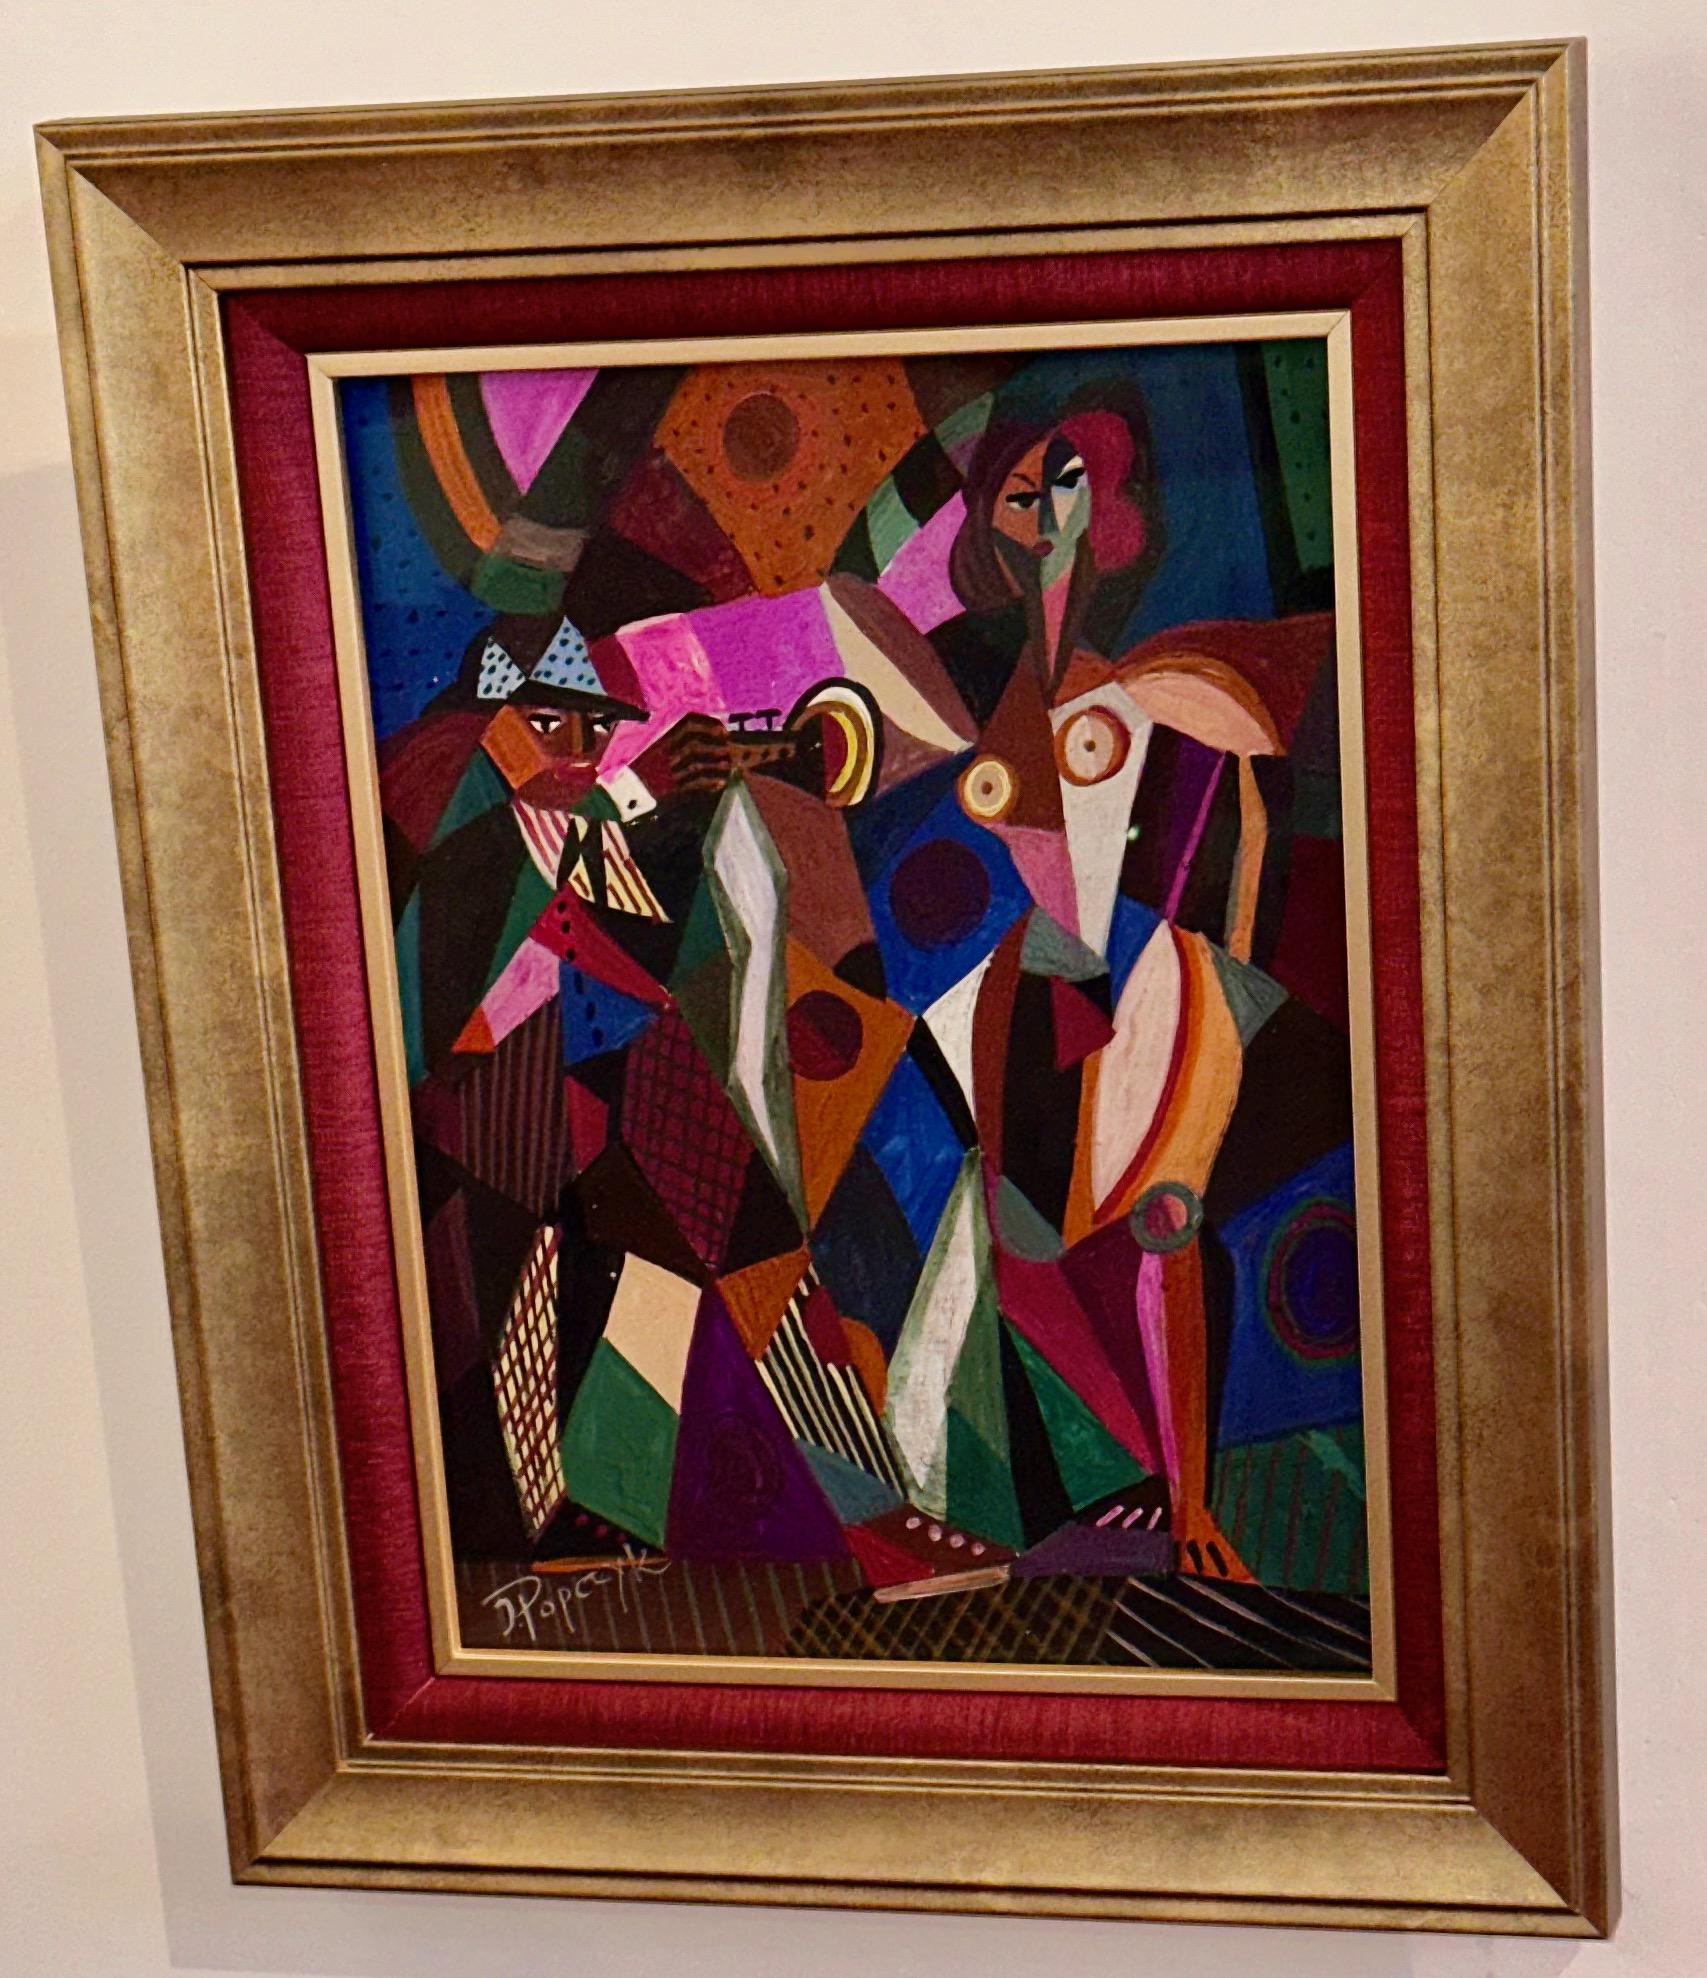 Jozef Popczyk, a Polish artist known for his vibrant palette and affinity for Cubism, demonstrates his skill in blending Cubist and Art Deco styles in this oil painting on paper. Like many of his contemporaries, Popczyk was born in Poland and was